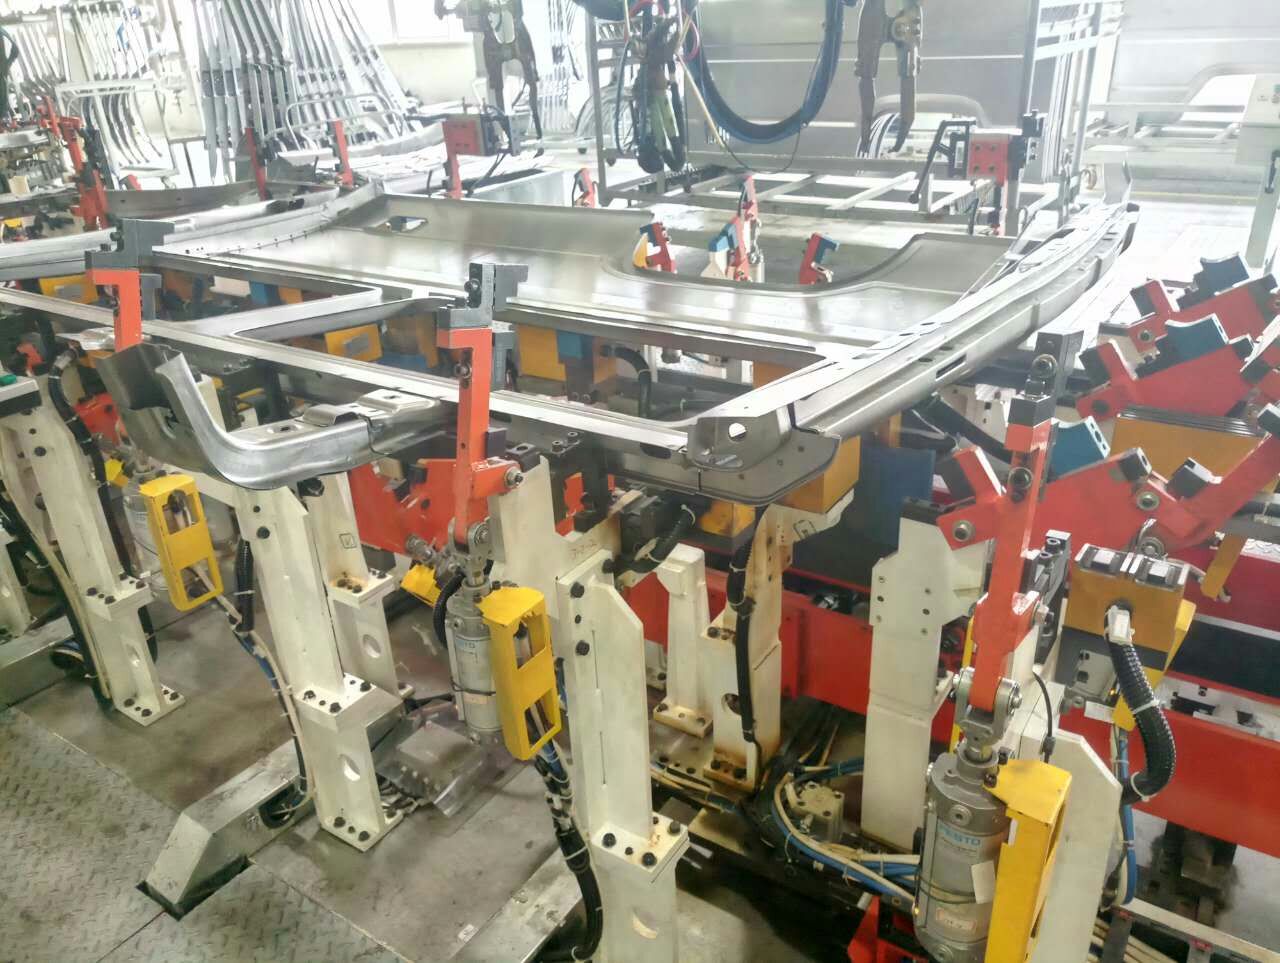 Magnetic Welding Clamps in Automobile Manufacturing Assembly - HVR MAG